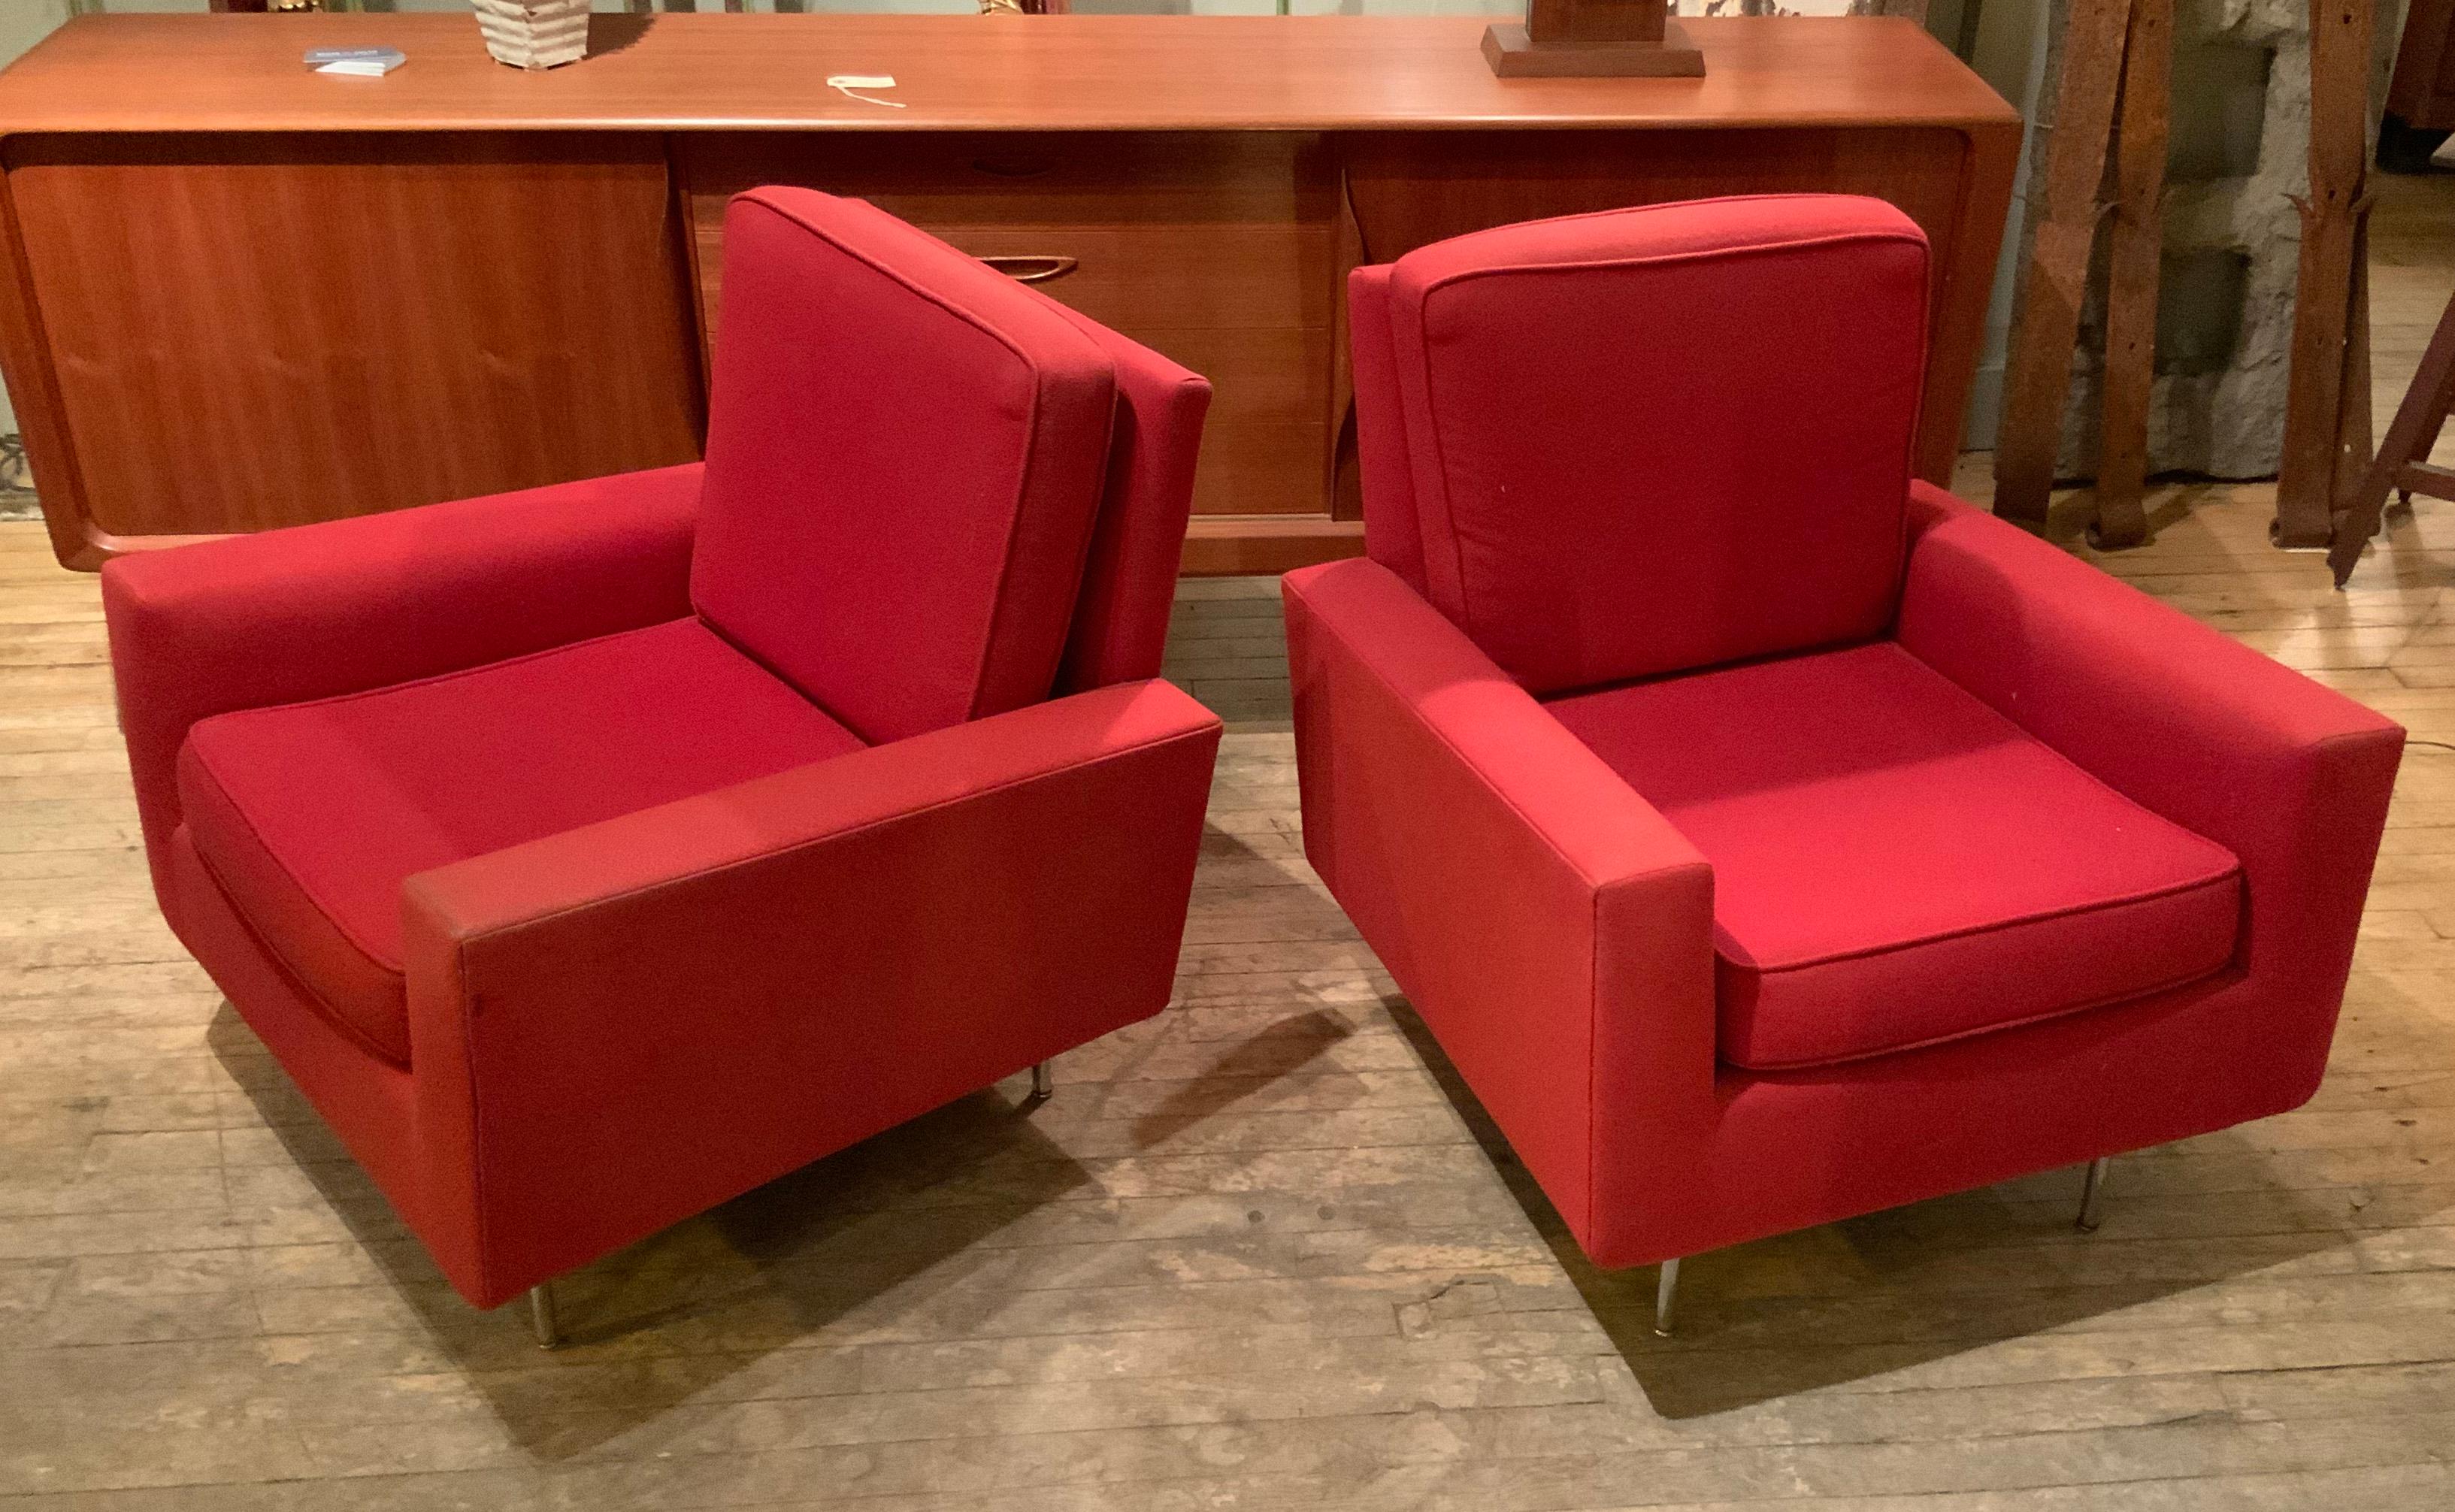 A beautiful and rare pair of modern 1950s club chairs designed by Florence Knoll for Knoll International. Classic design with angled back and loose seat and back cushions, raised on chromed steel legs. In their original red upholstery, which shows